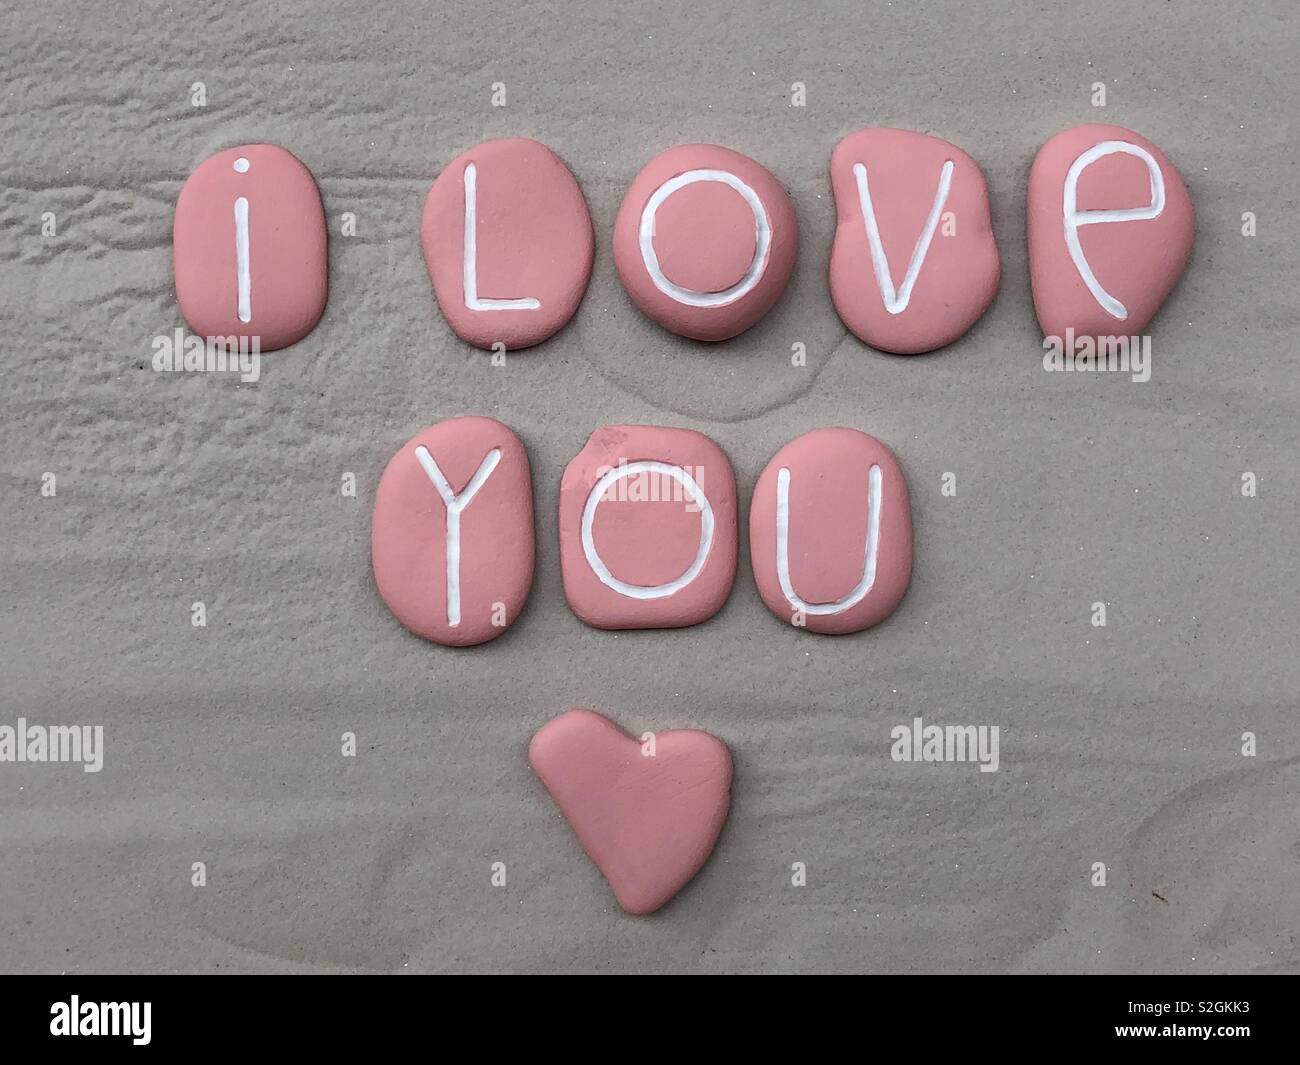 I love you with all my heart, conceptual composition with pink colored stones over white sand Stock Photo